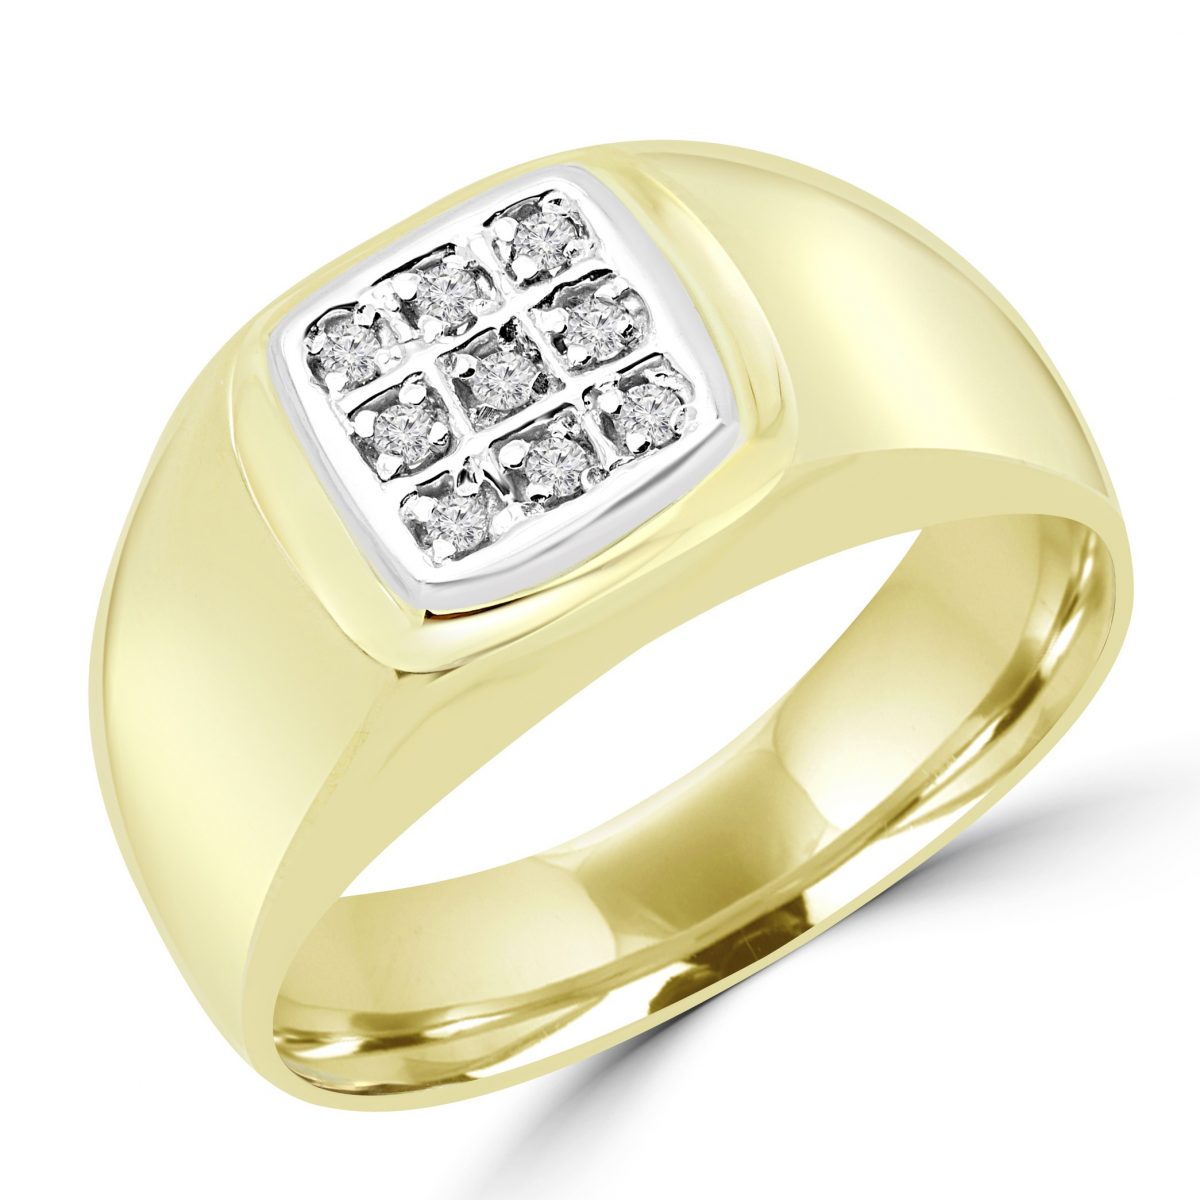 Classic pave set diamond ring in yellow gold